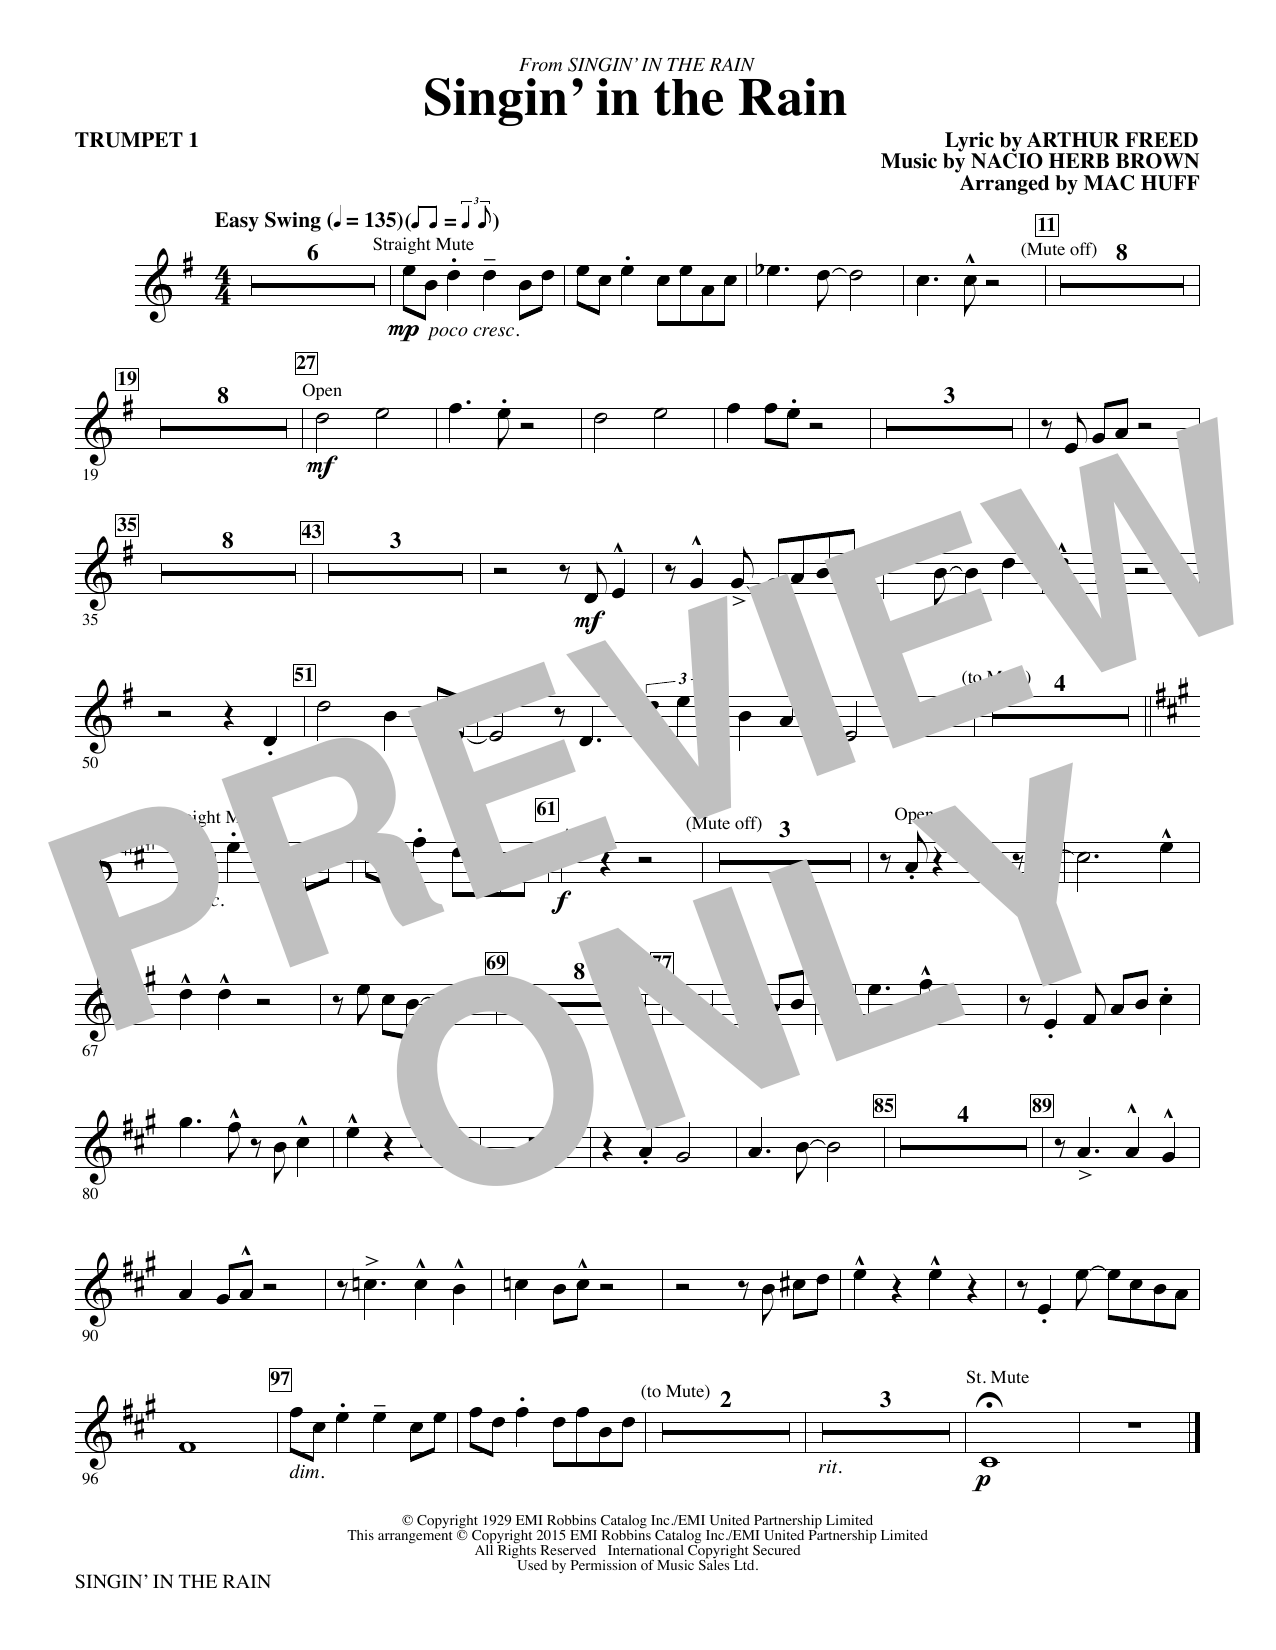 Gene Kelly Singin' in the Rain (arr. Mac Huff) - Trumpet 1 sheet music notes and chords. Download Printable PDF.